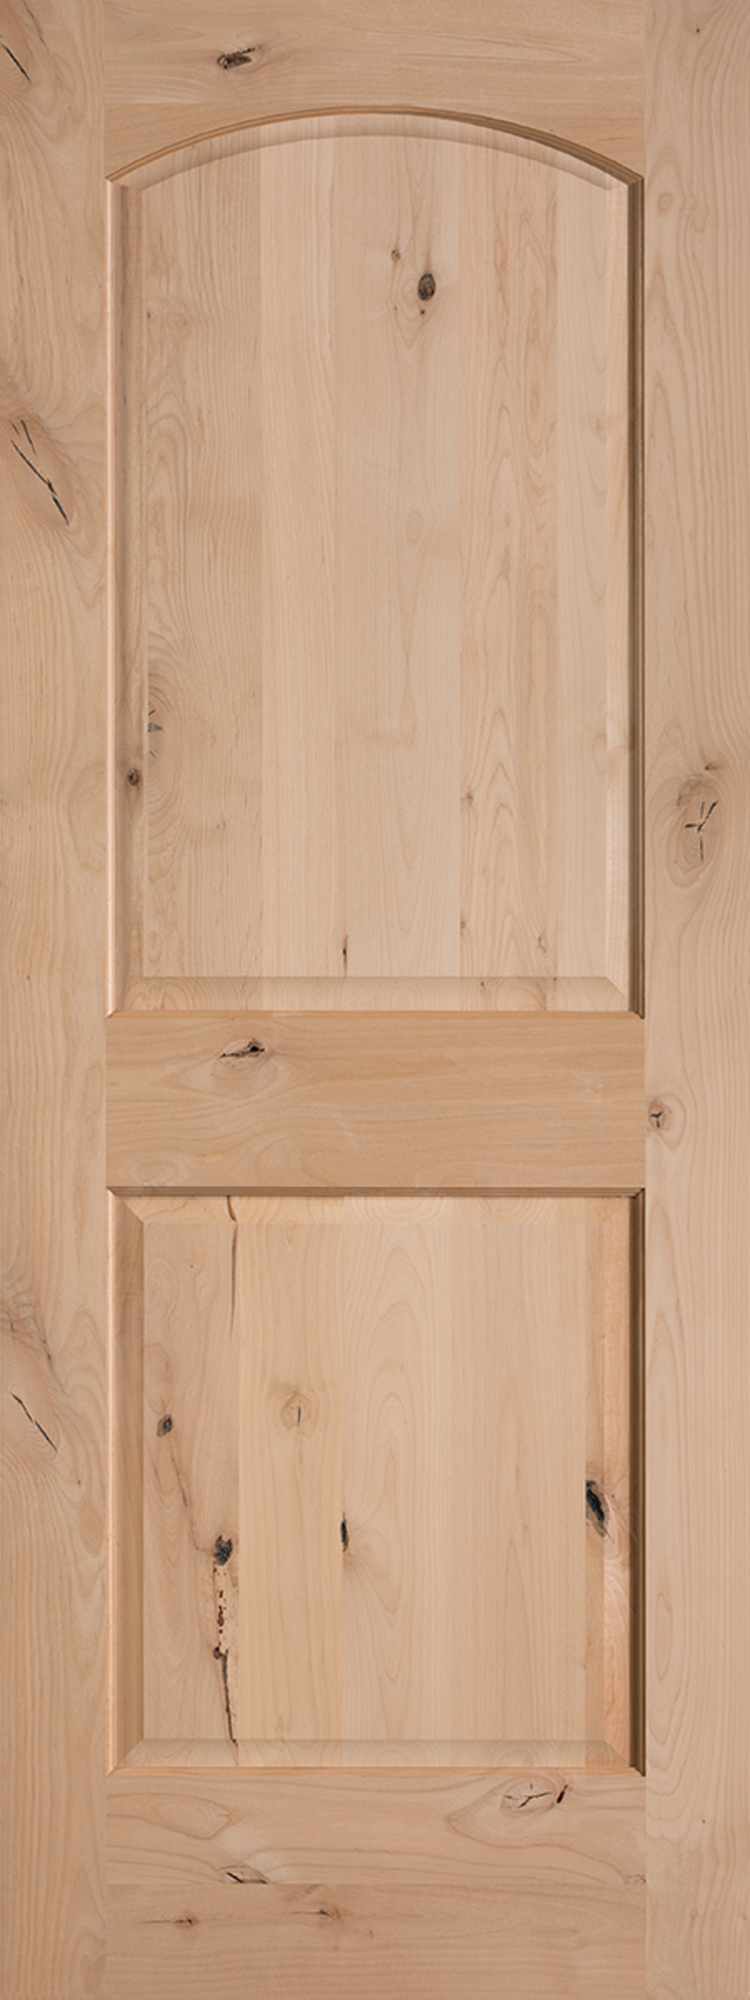 Knotty alder wood door for home’s interior features a square panel, topped by an elegantly arched panel